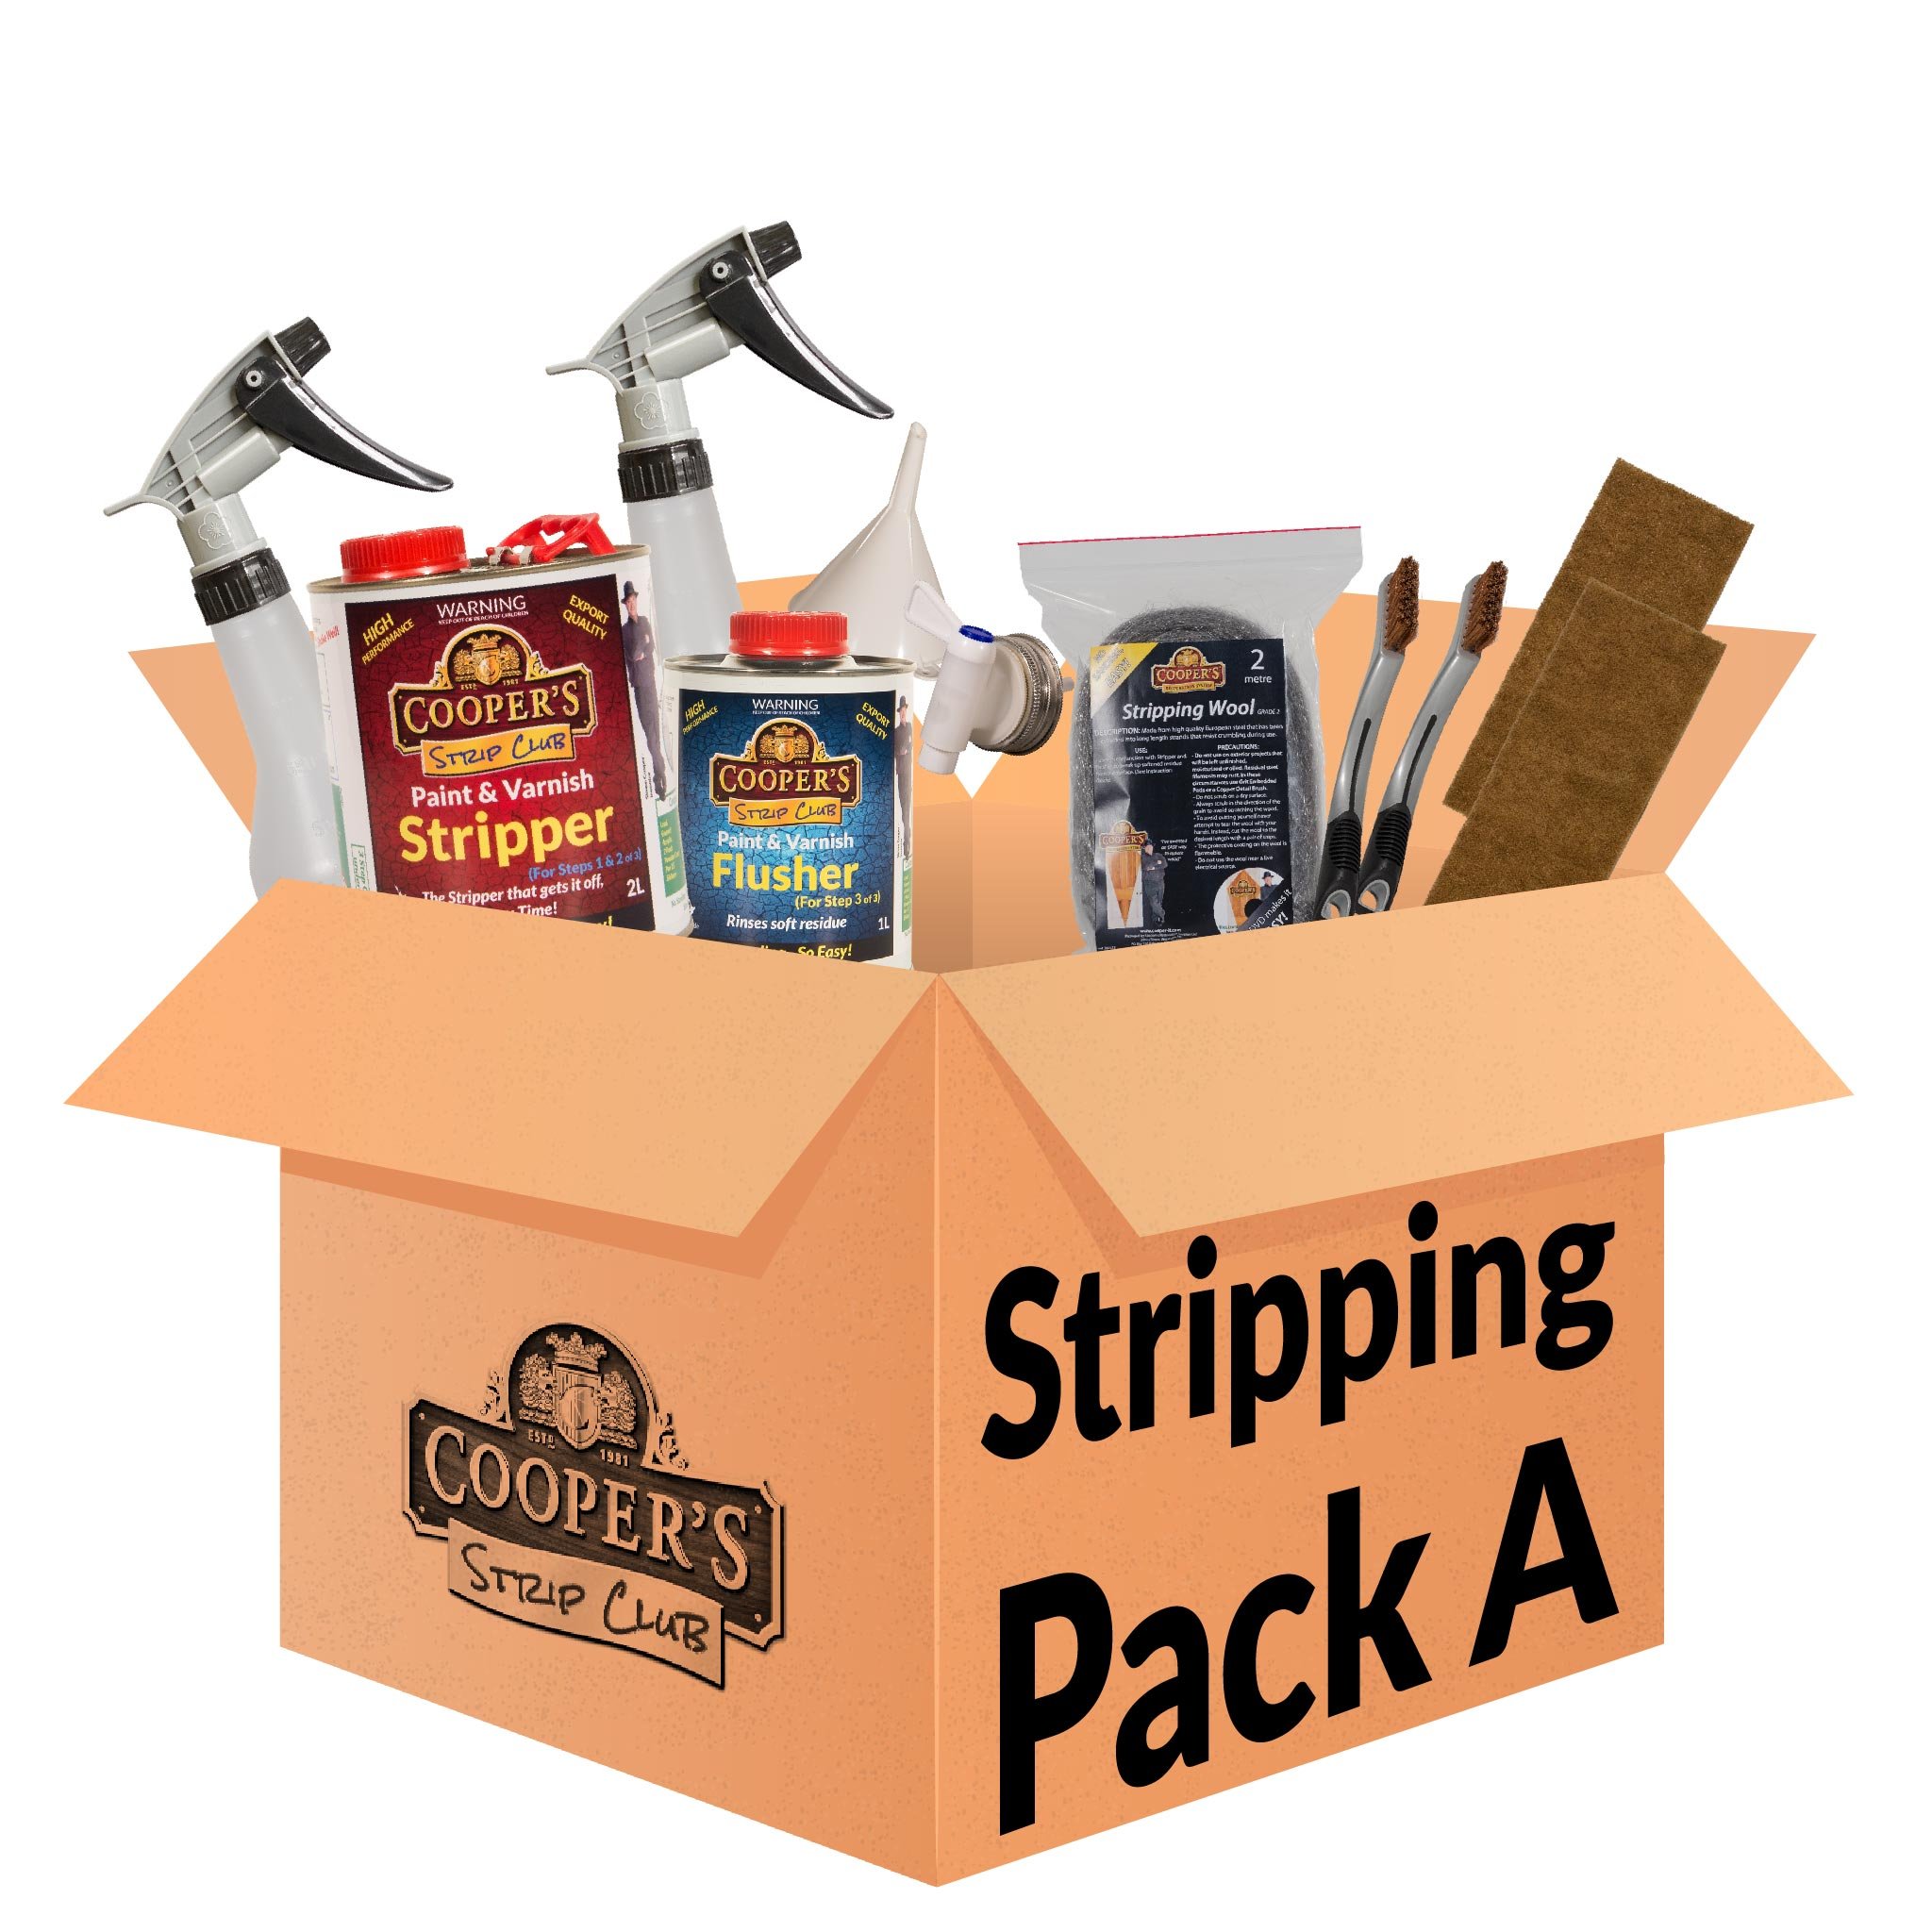 Cooper's Stripping Pack A